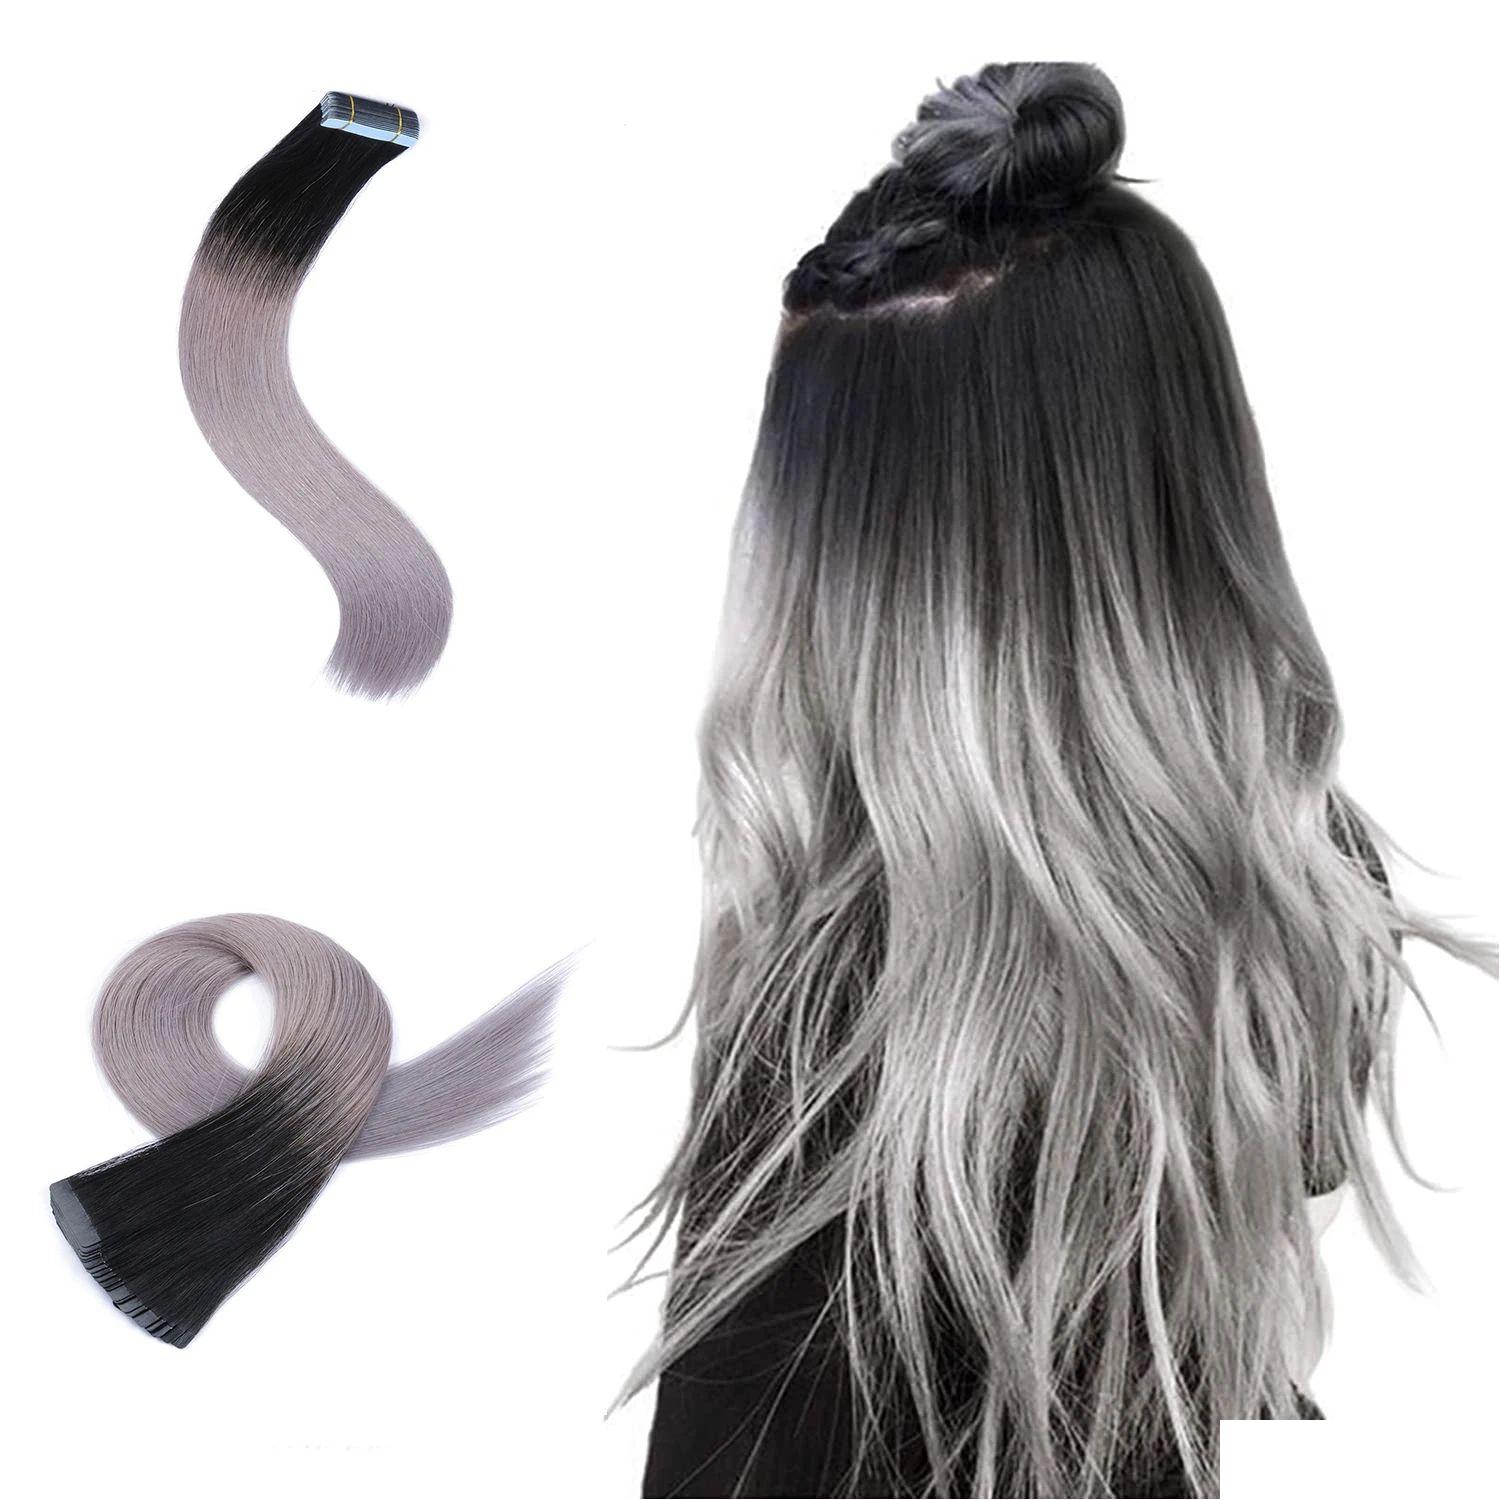 Hair Extension Kits Extensions Ombre Ash Blonde Natural Tape In Humanhair Skin Weft Adhesive Invisible Real Straight For Black Drop Dhdmo